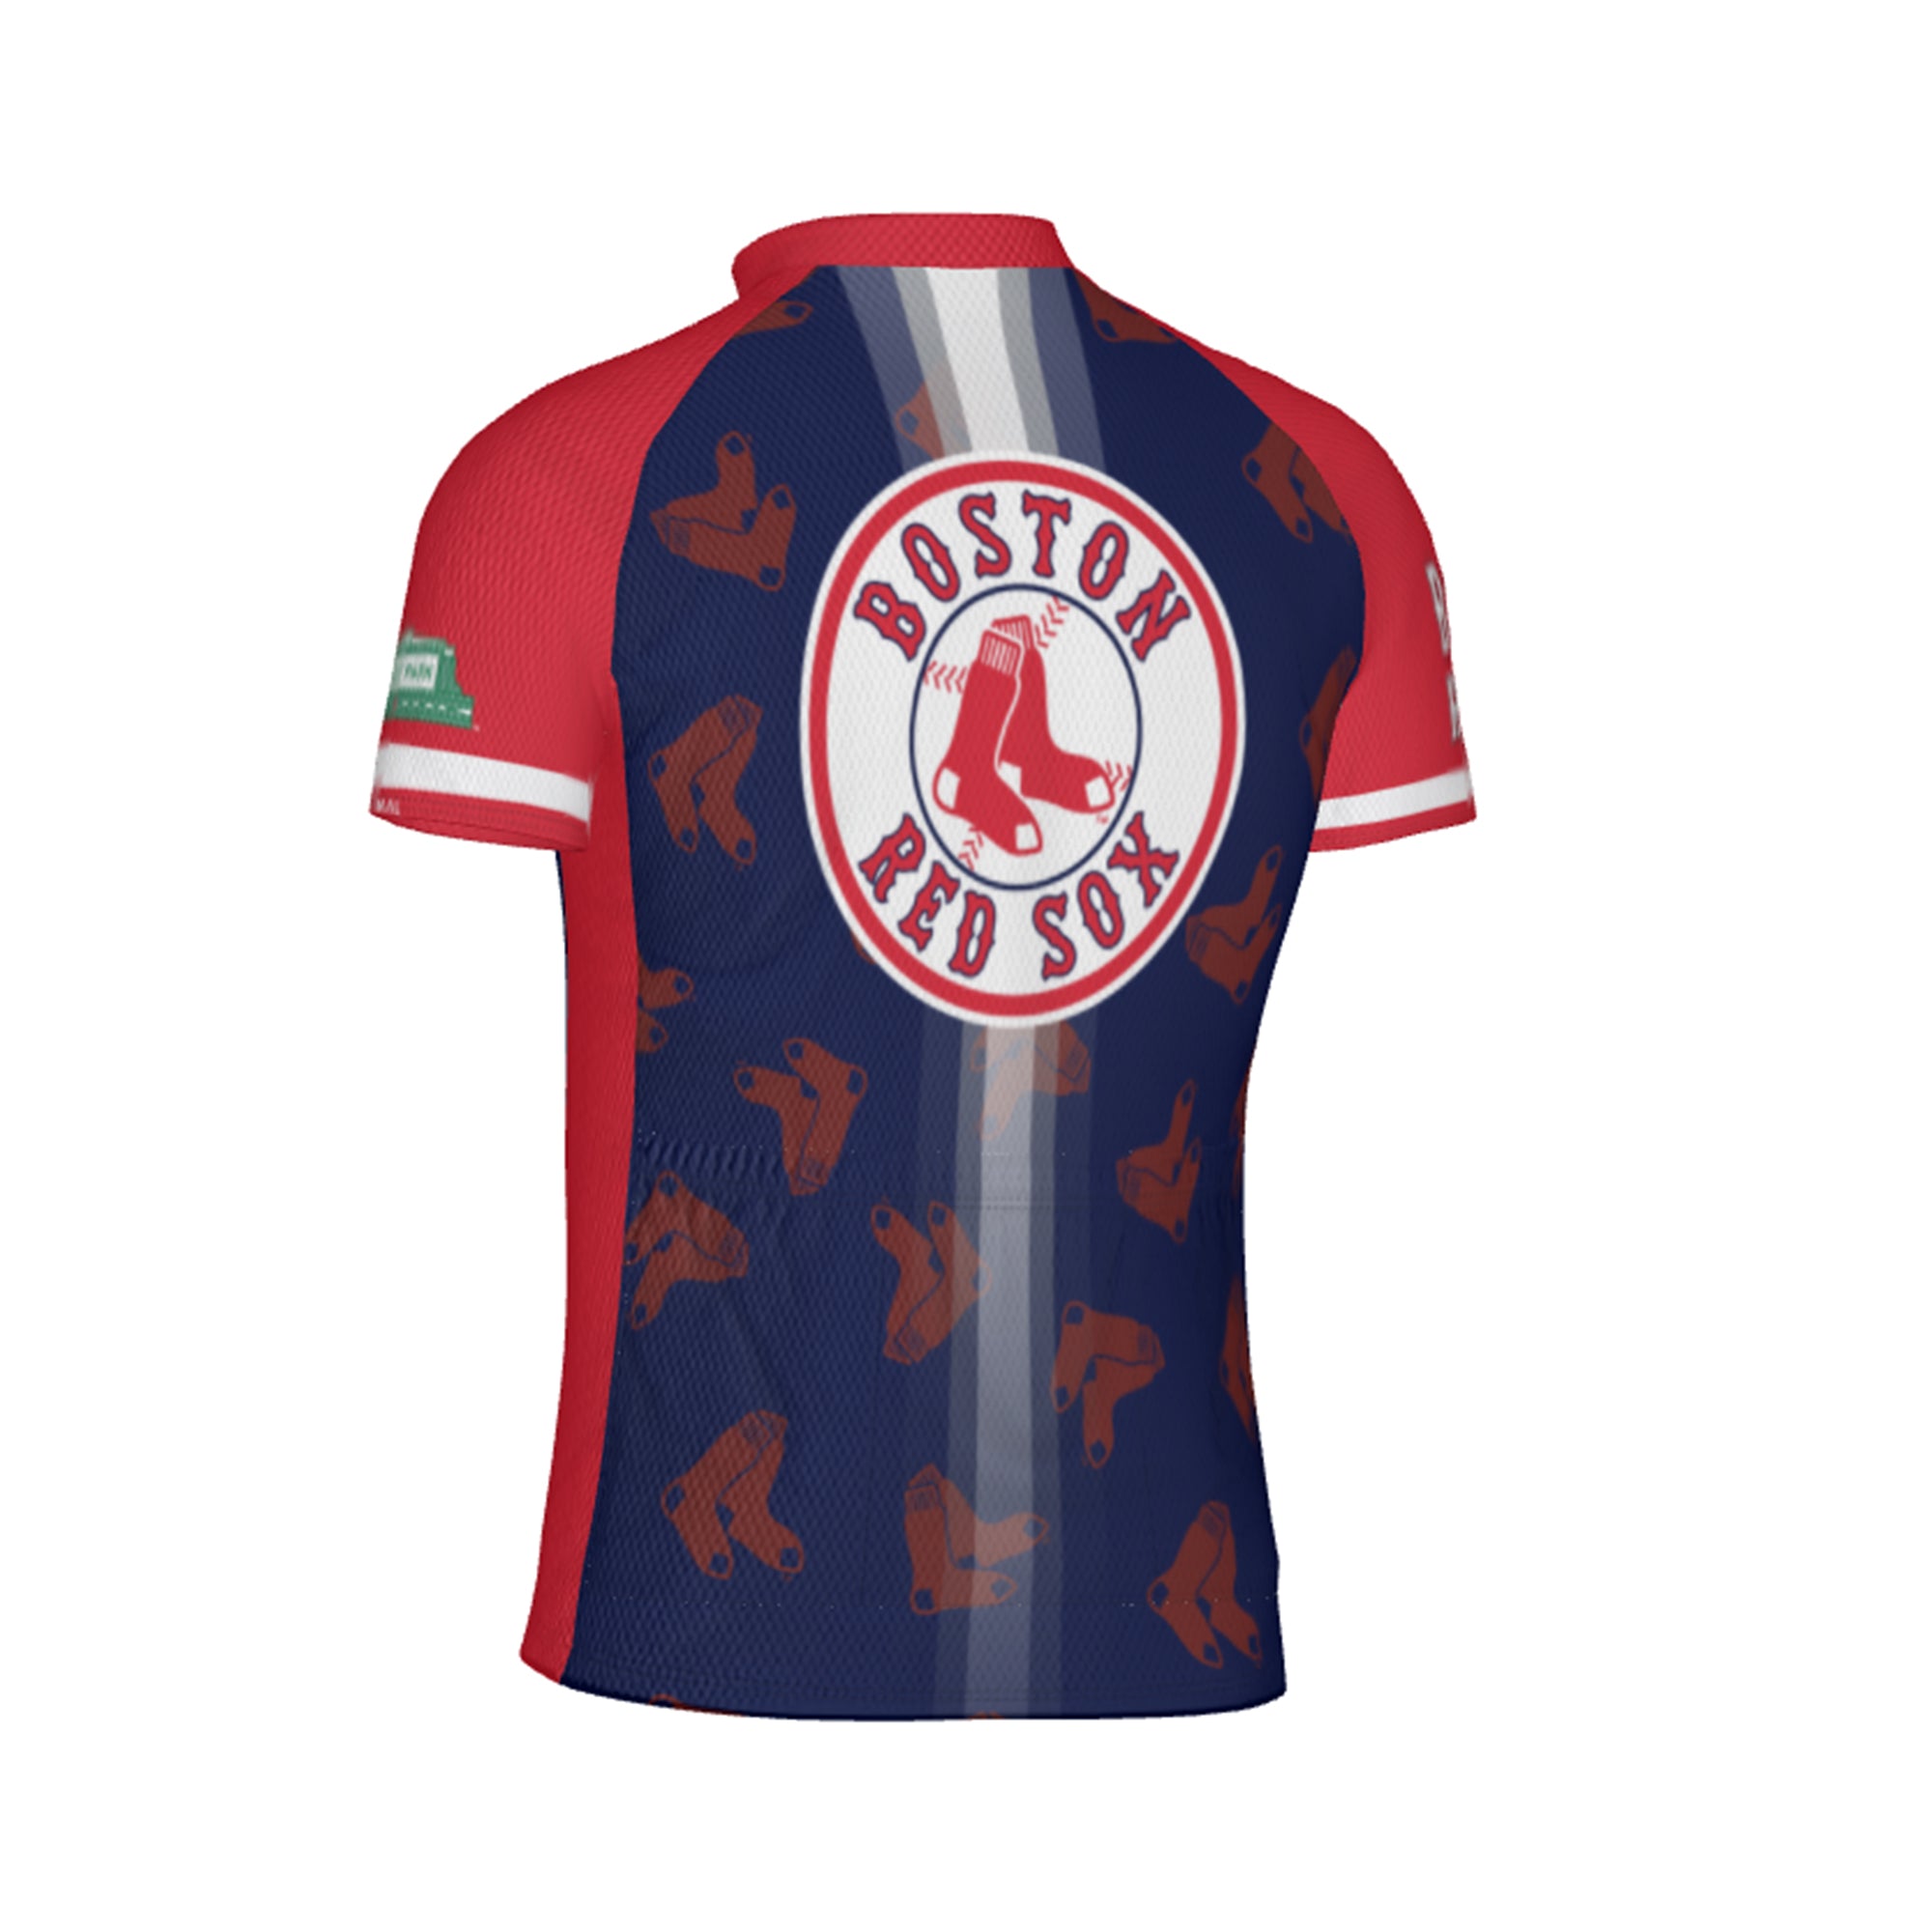  Boston Red Sox Men's Embroidered Full Button Jersey (as1,  Alpha, s, Regular, Regular) : Sports & Outdoors